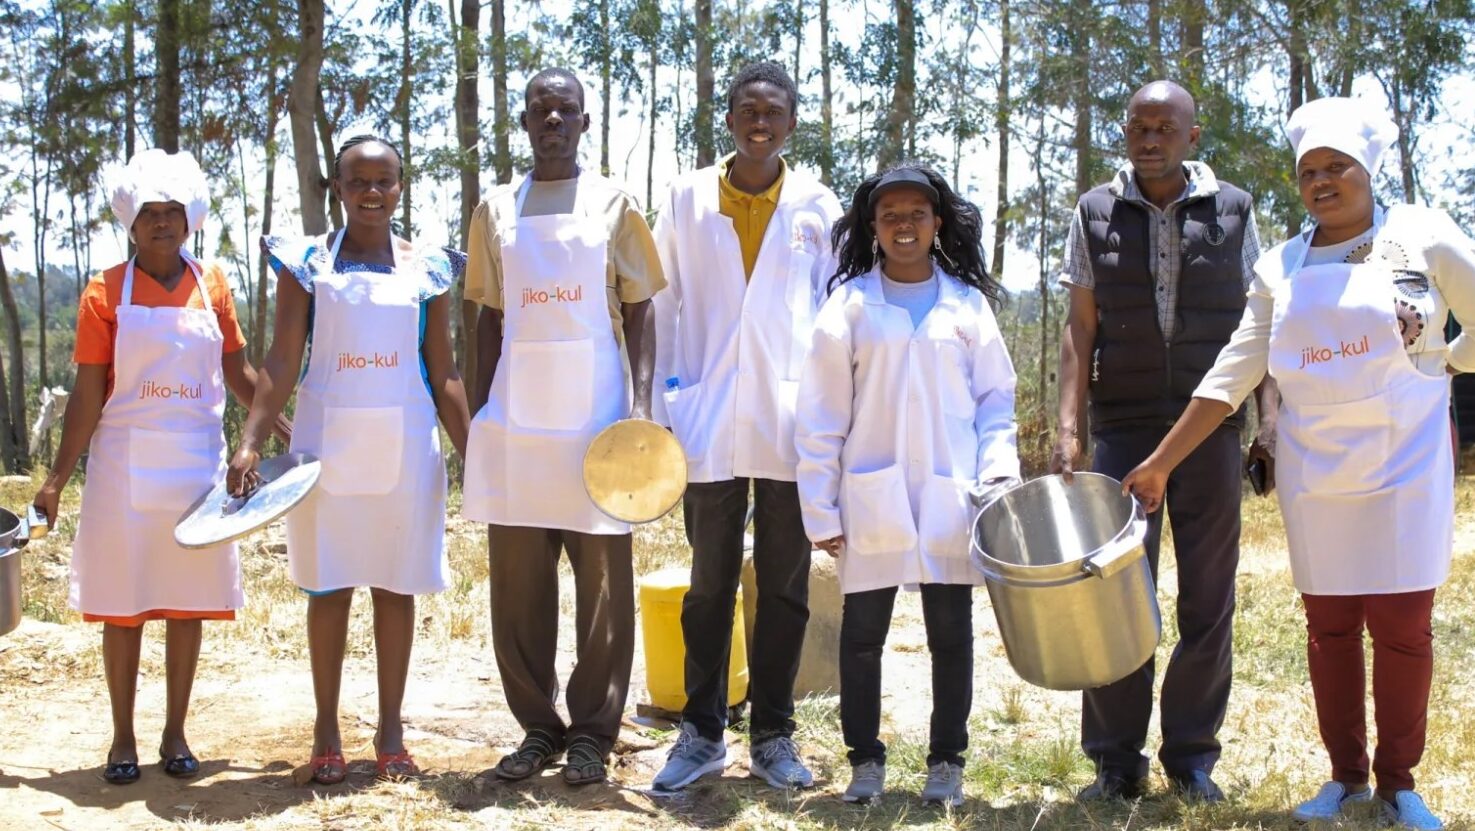 Mercy Kyalo: Fostering Institutional Clean Cooking in Schools Through Innovation and Entrepreneurship